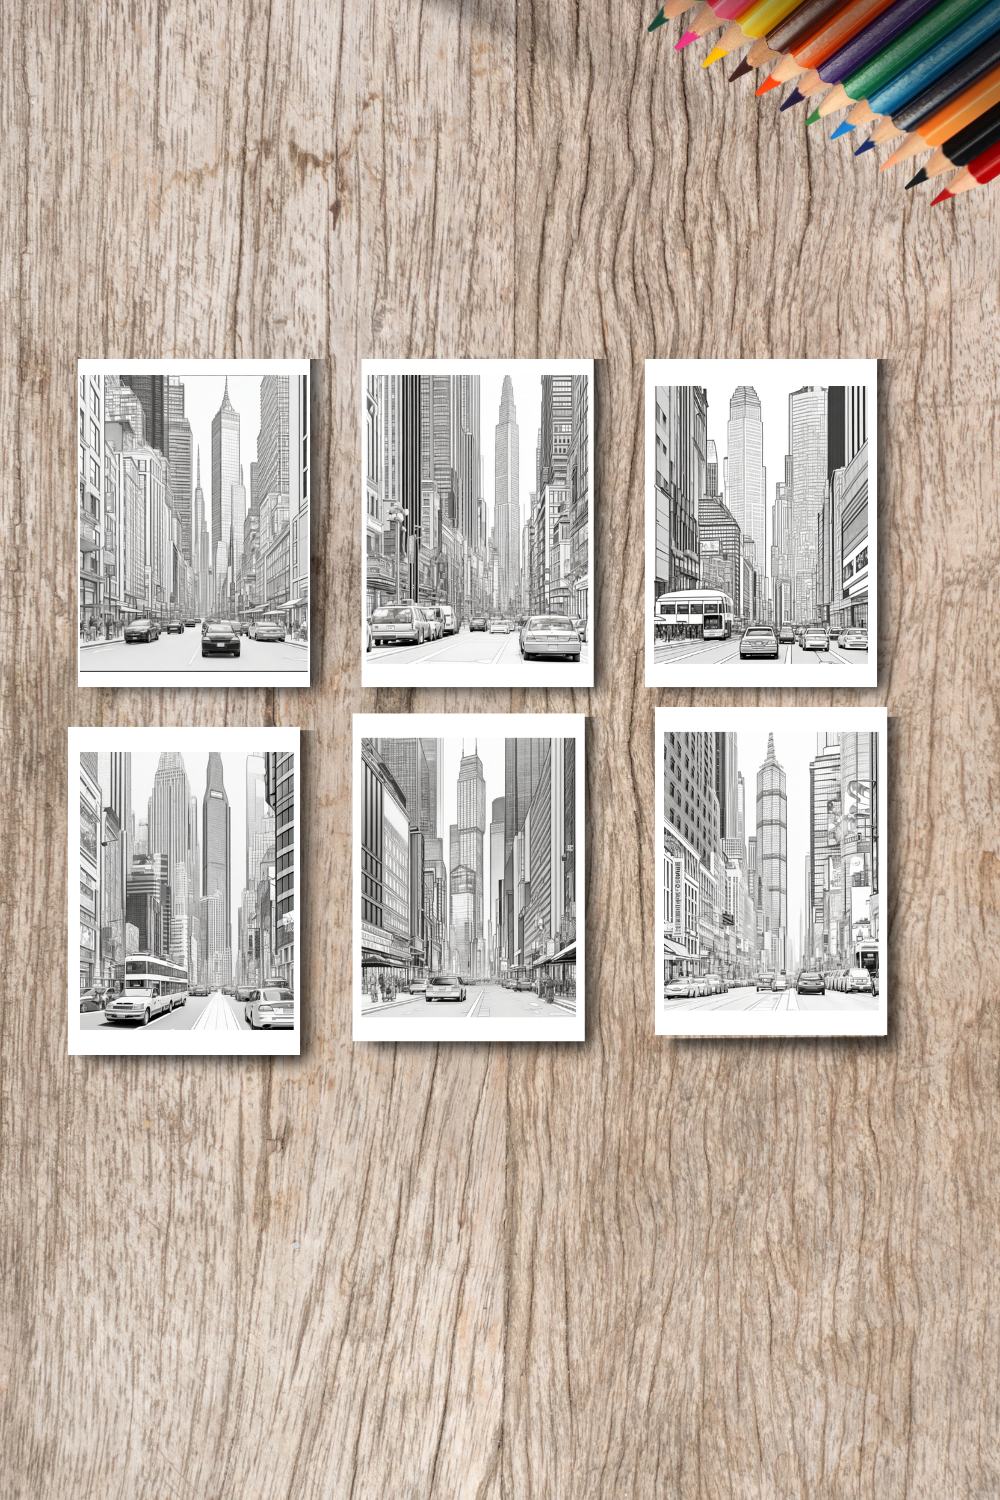 A cityscape with skyscrapers and a busy street scene coloring page 2 pinterest preview image.